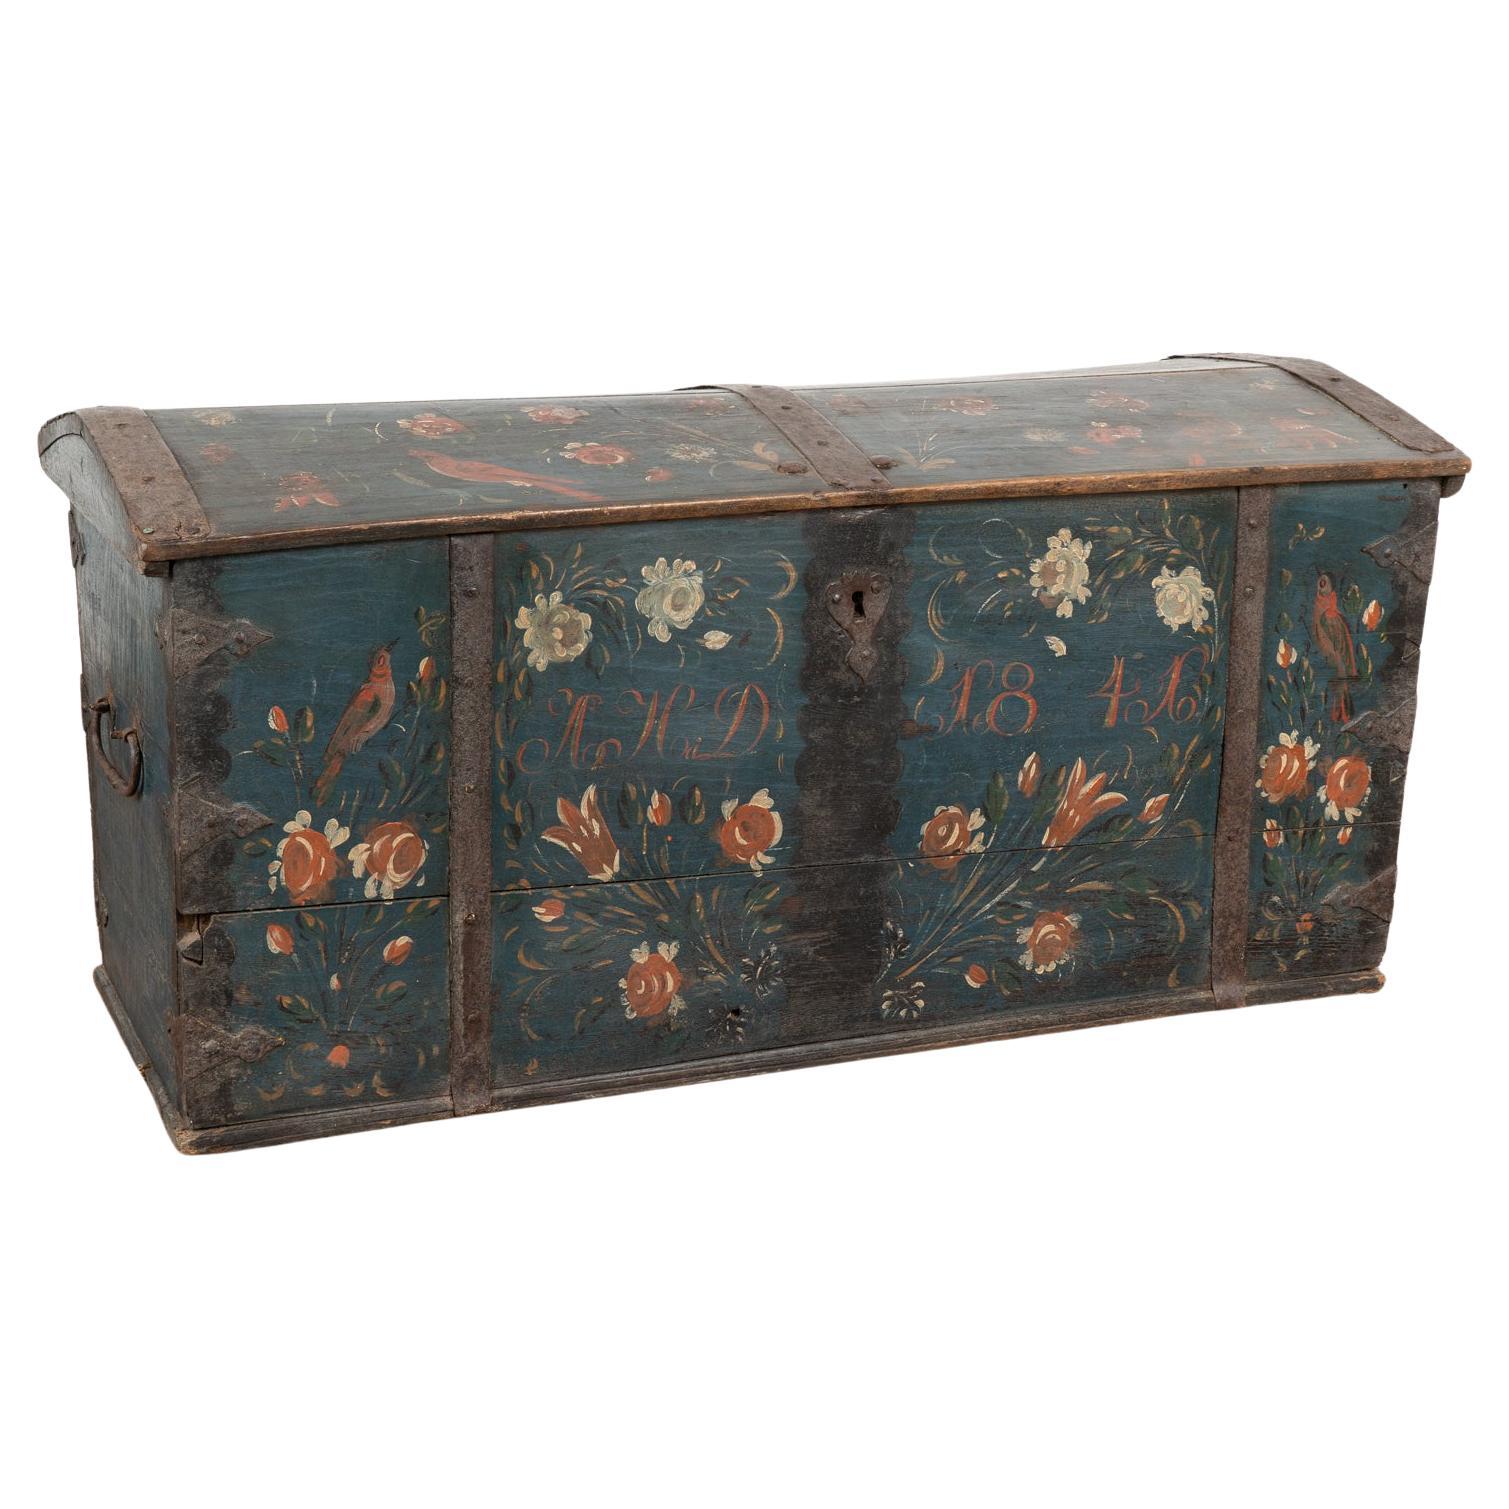 Original Painted Blue Dome Top Trunk with Birds and Flowers, Sweden dated 1841 For Sale